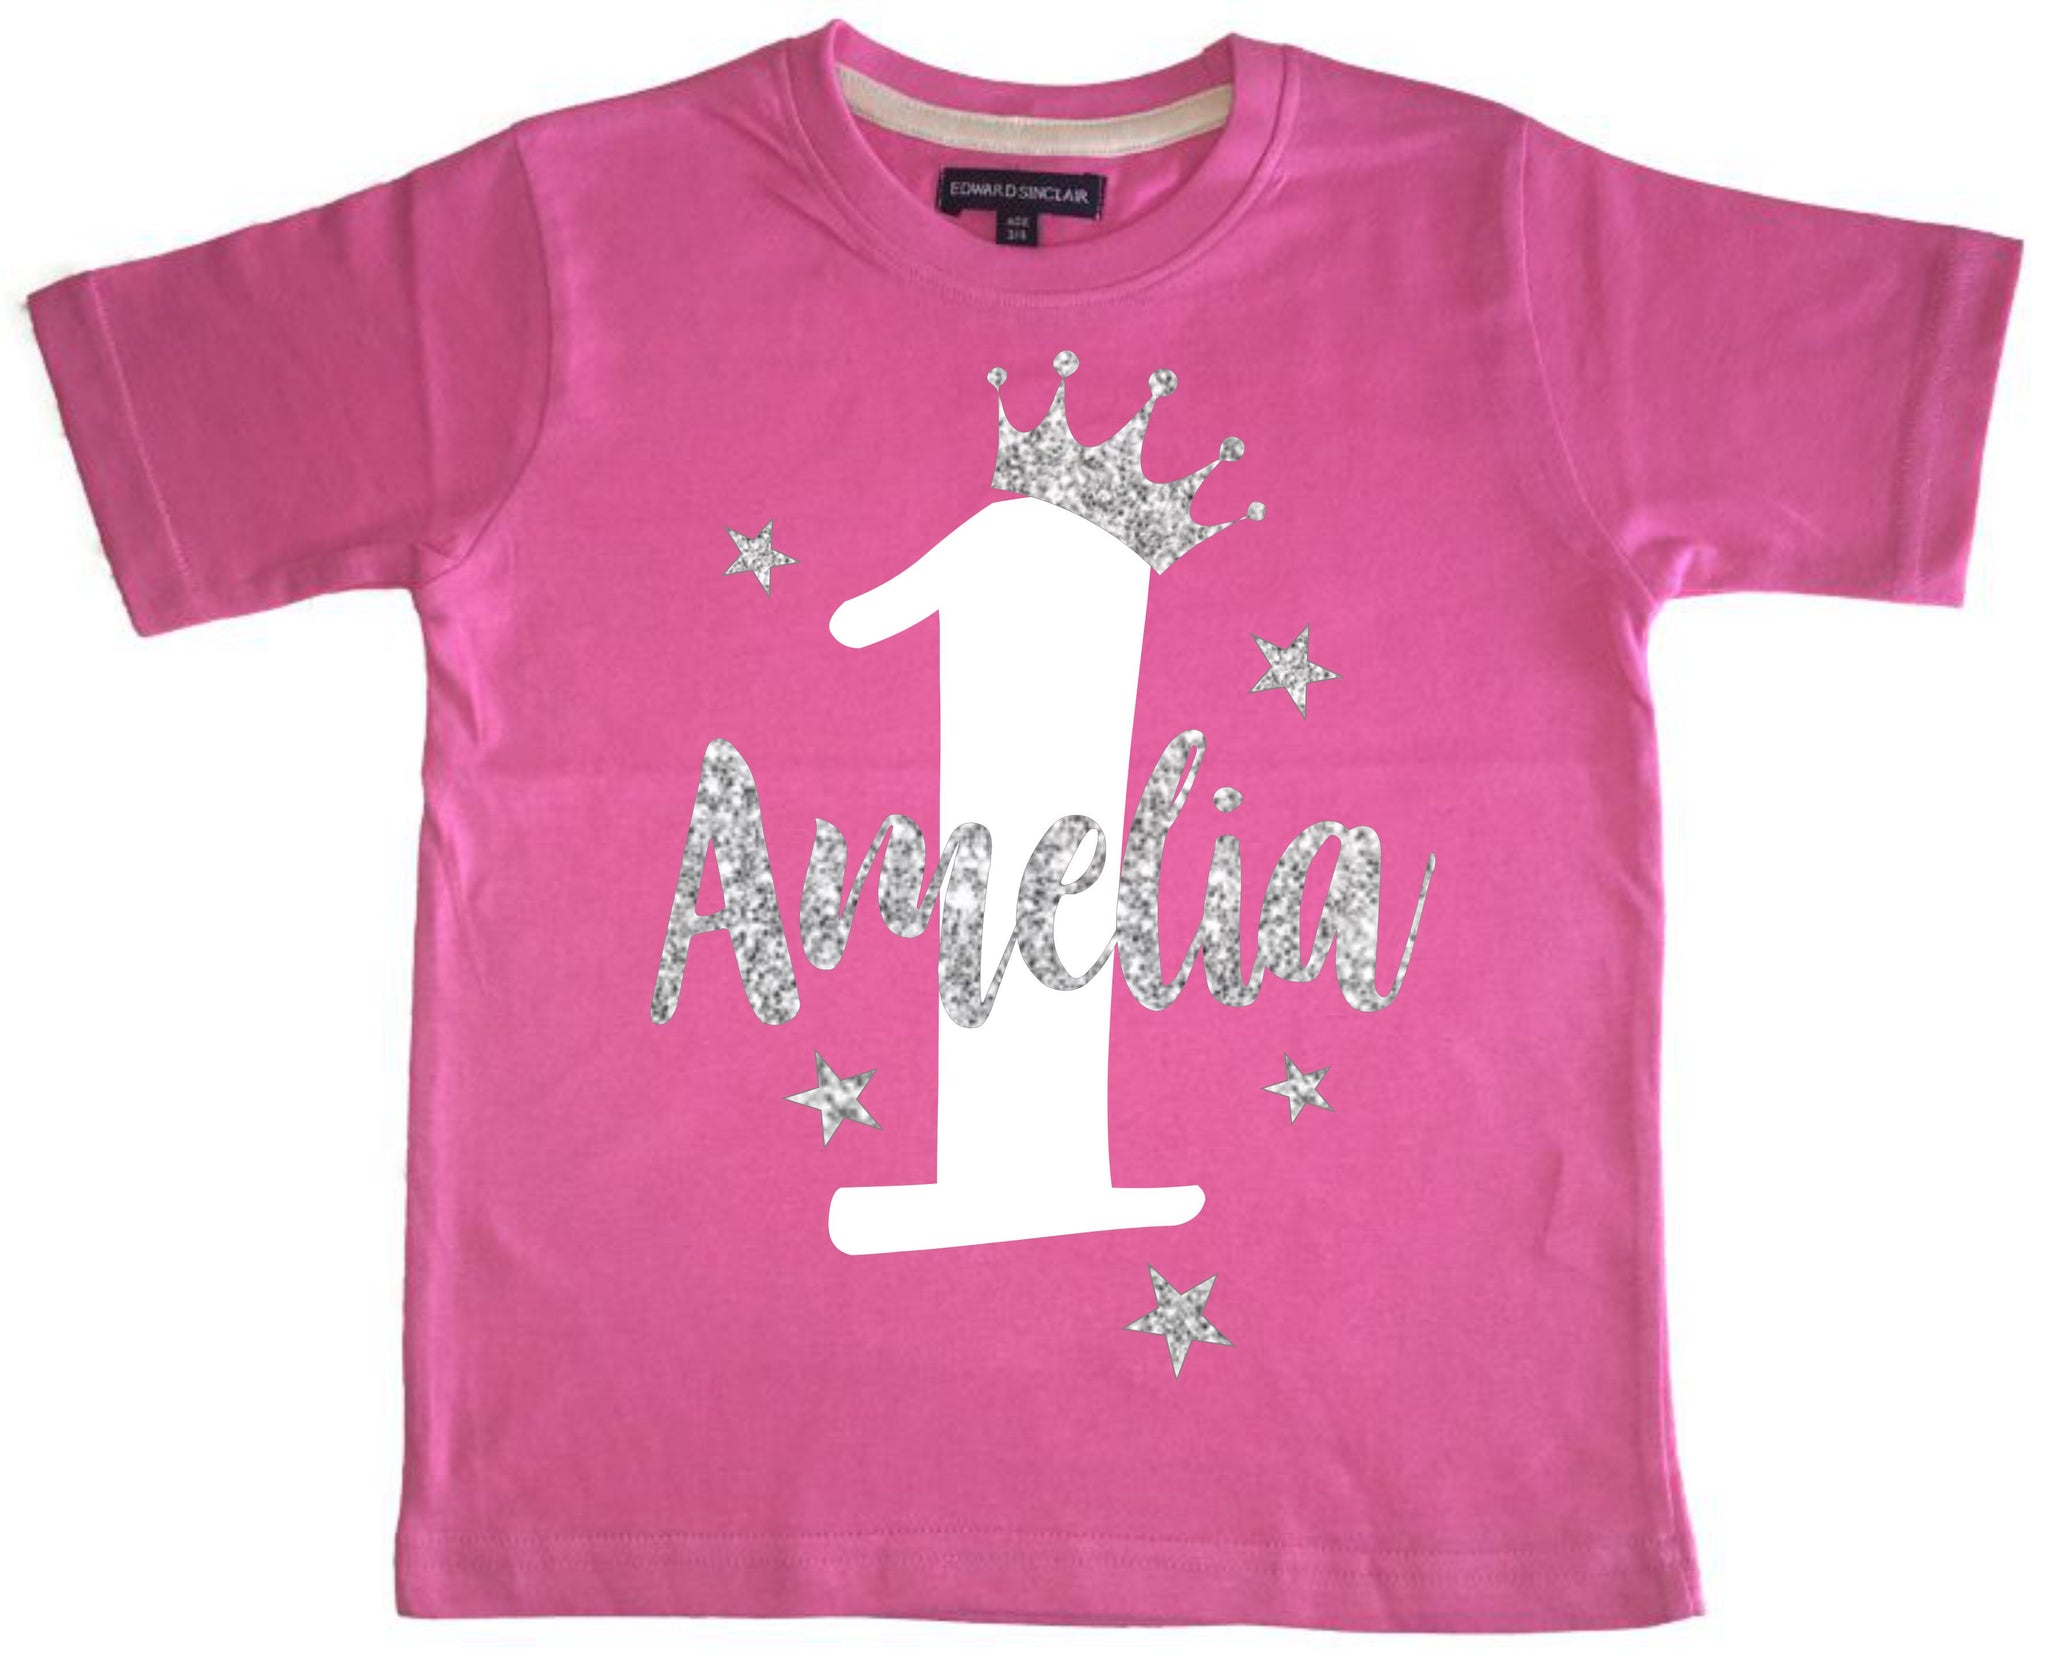 Personalised Girls Kids 1st Birthday T-Shirt with Your Name!